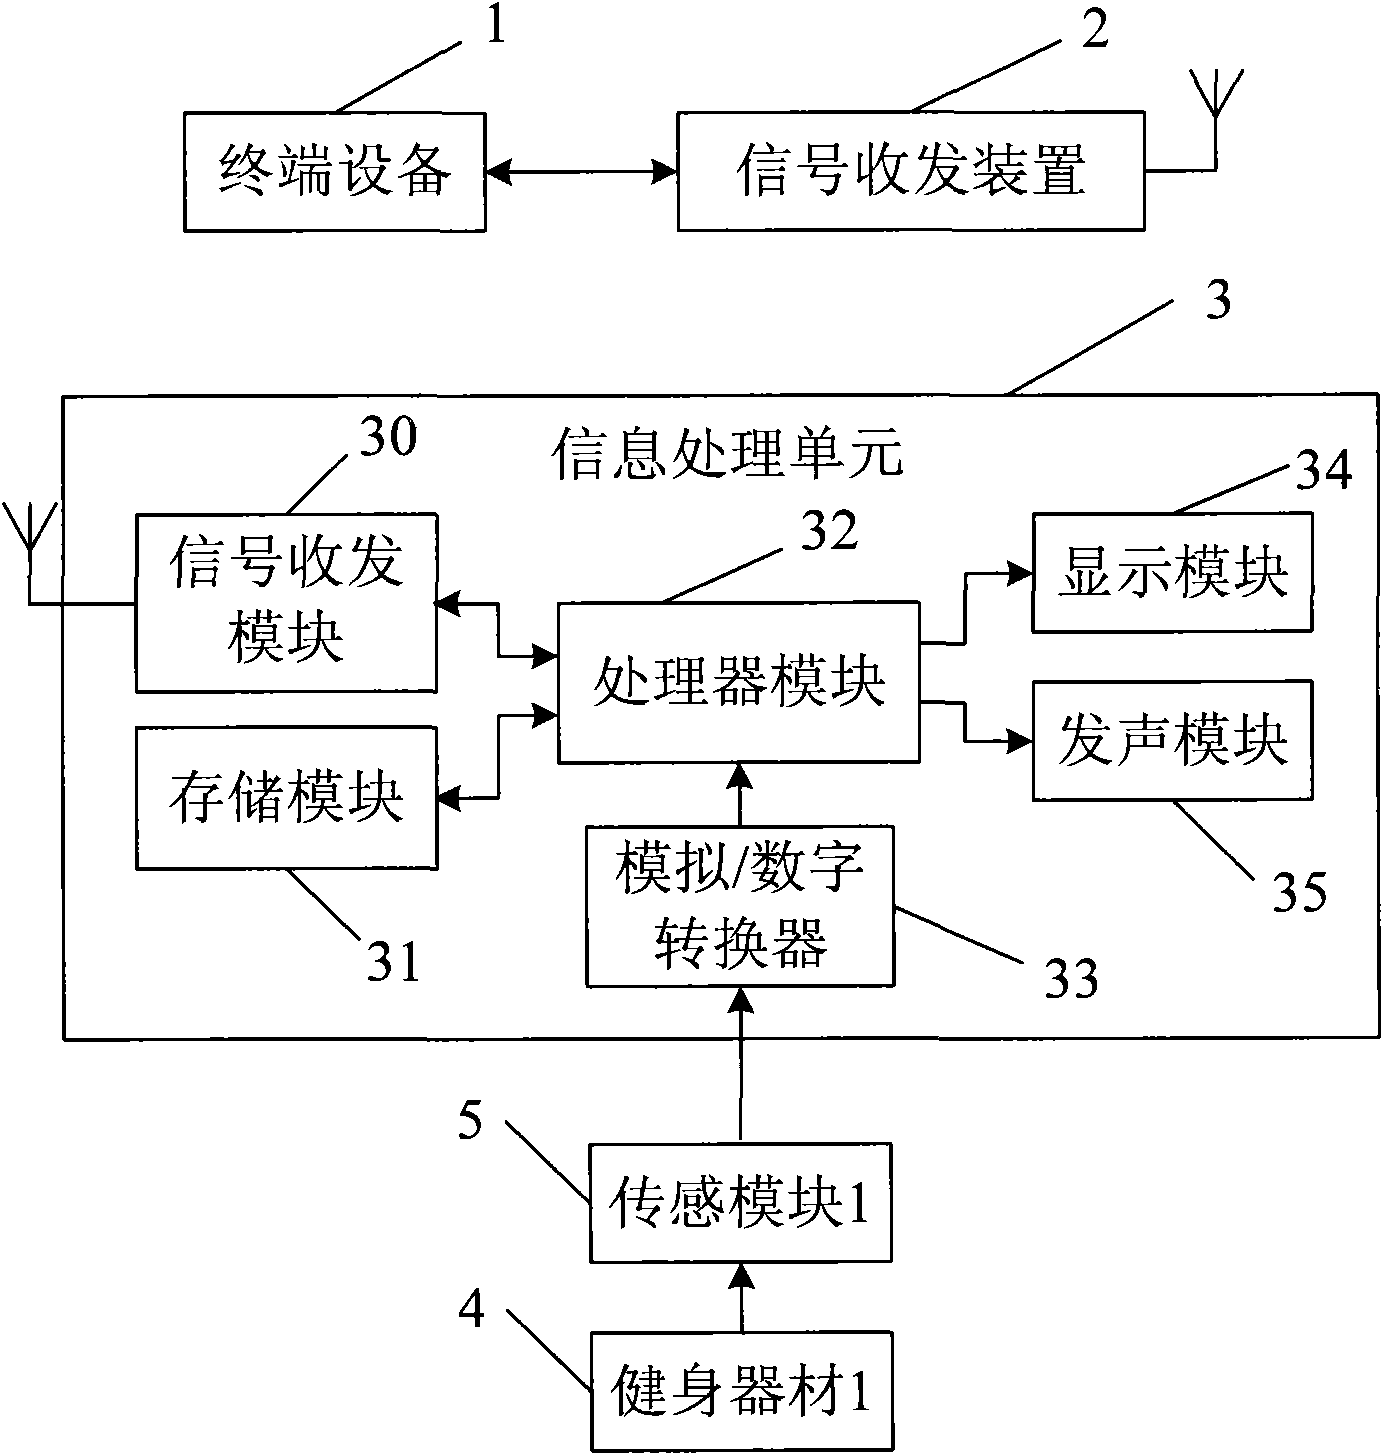 Game role property development system and method based on body building appliances